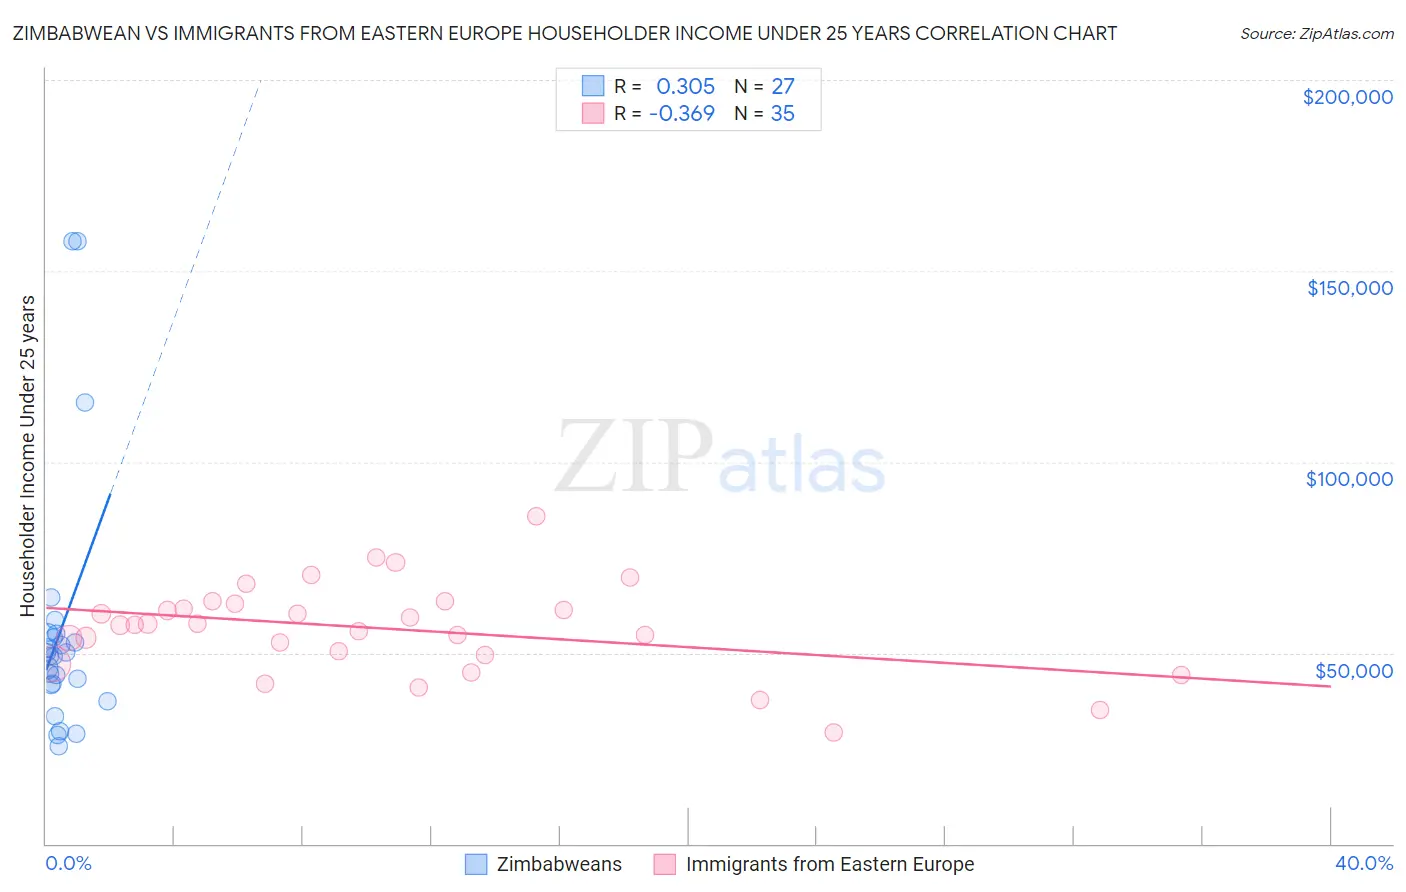 Zimbabwean vs Immigrants from Eastern Europe Householder Income Under 25 years